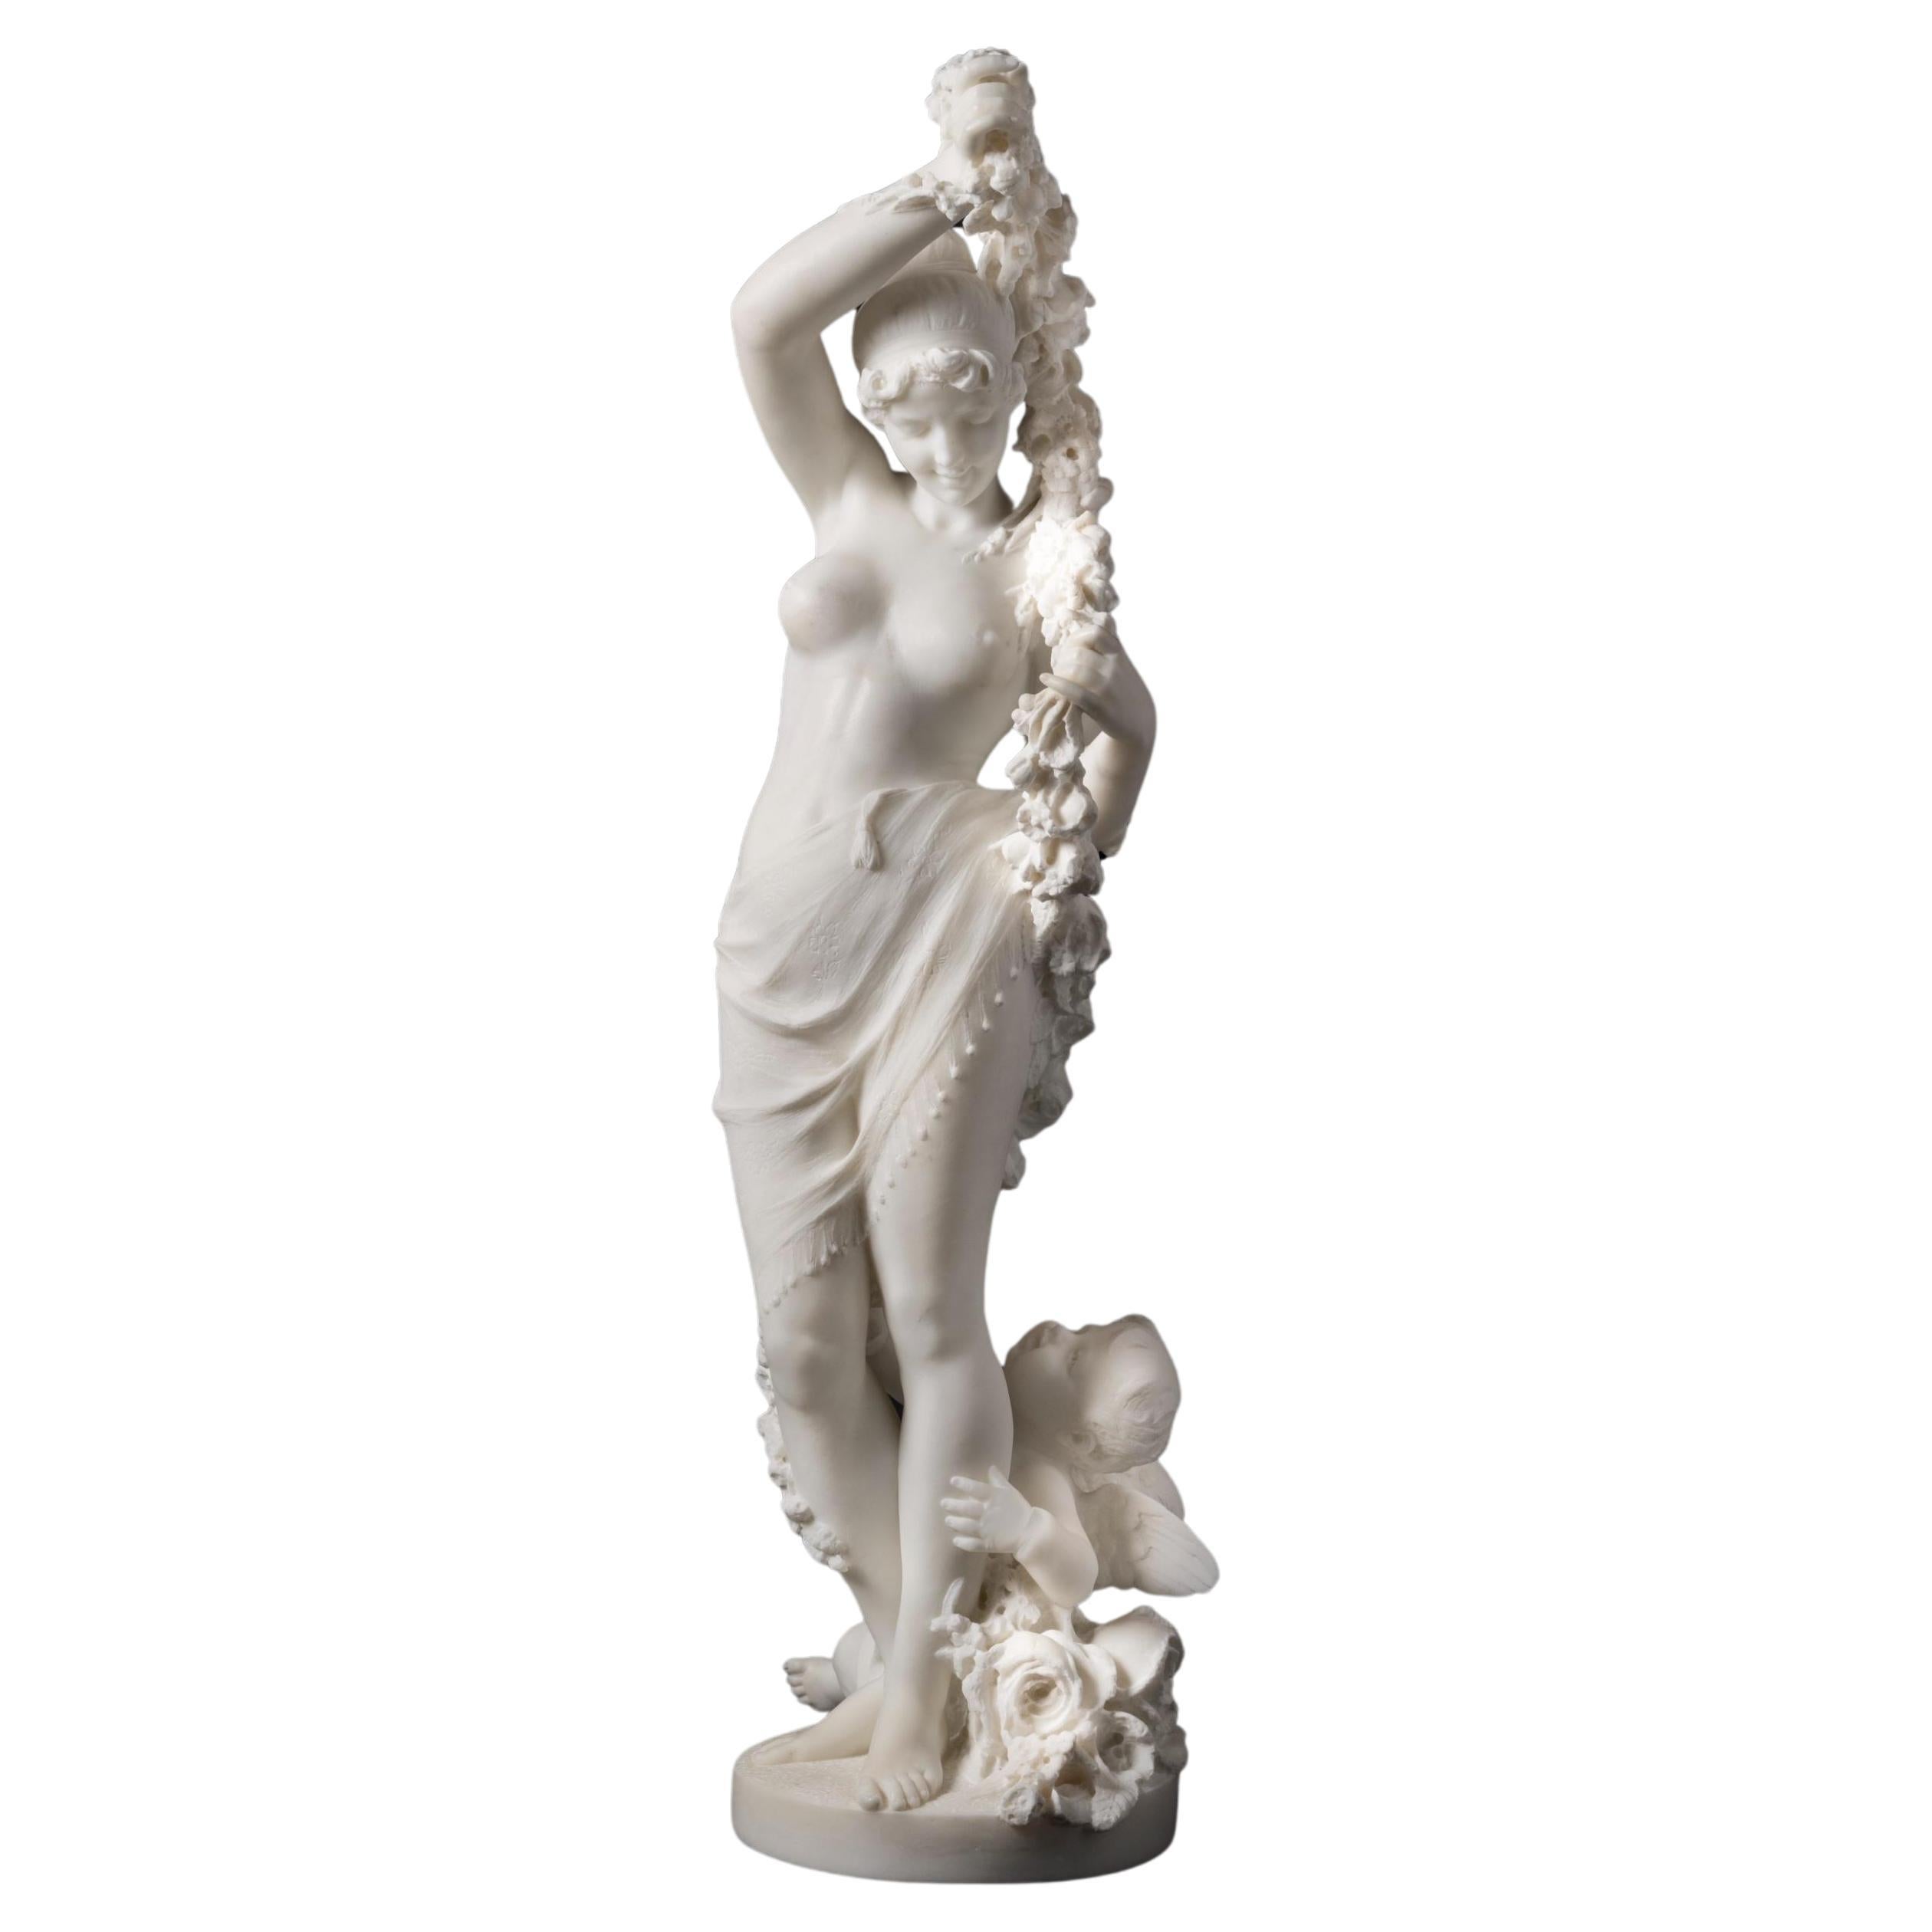 The 'Allegory of Spring' 19th Century Italian Marble Sculpture